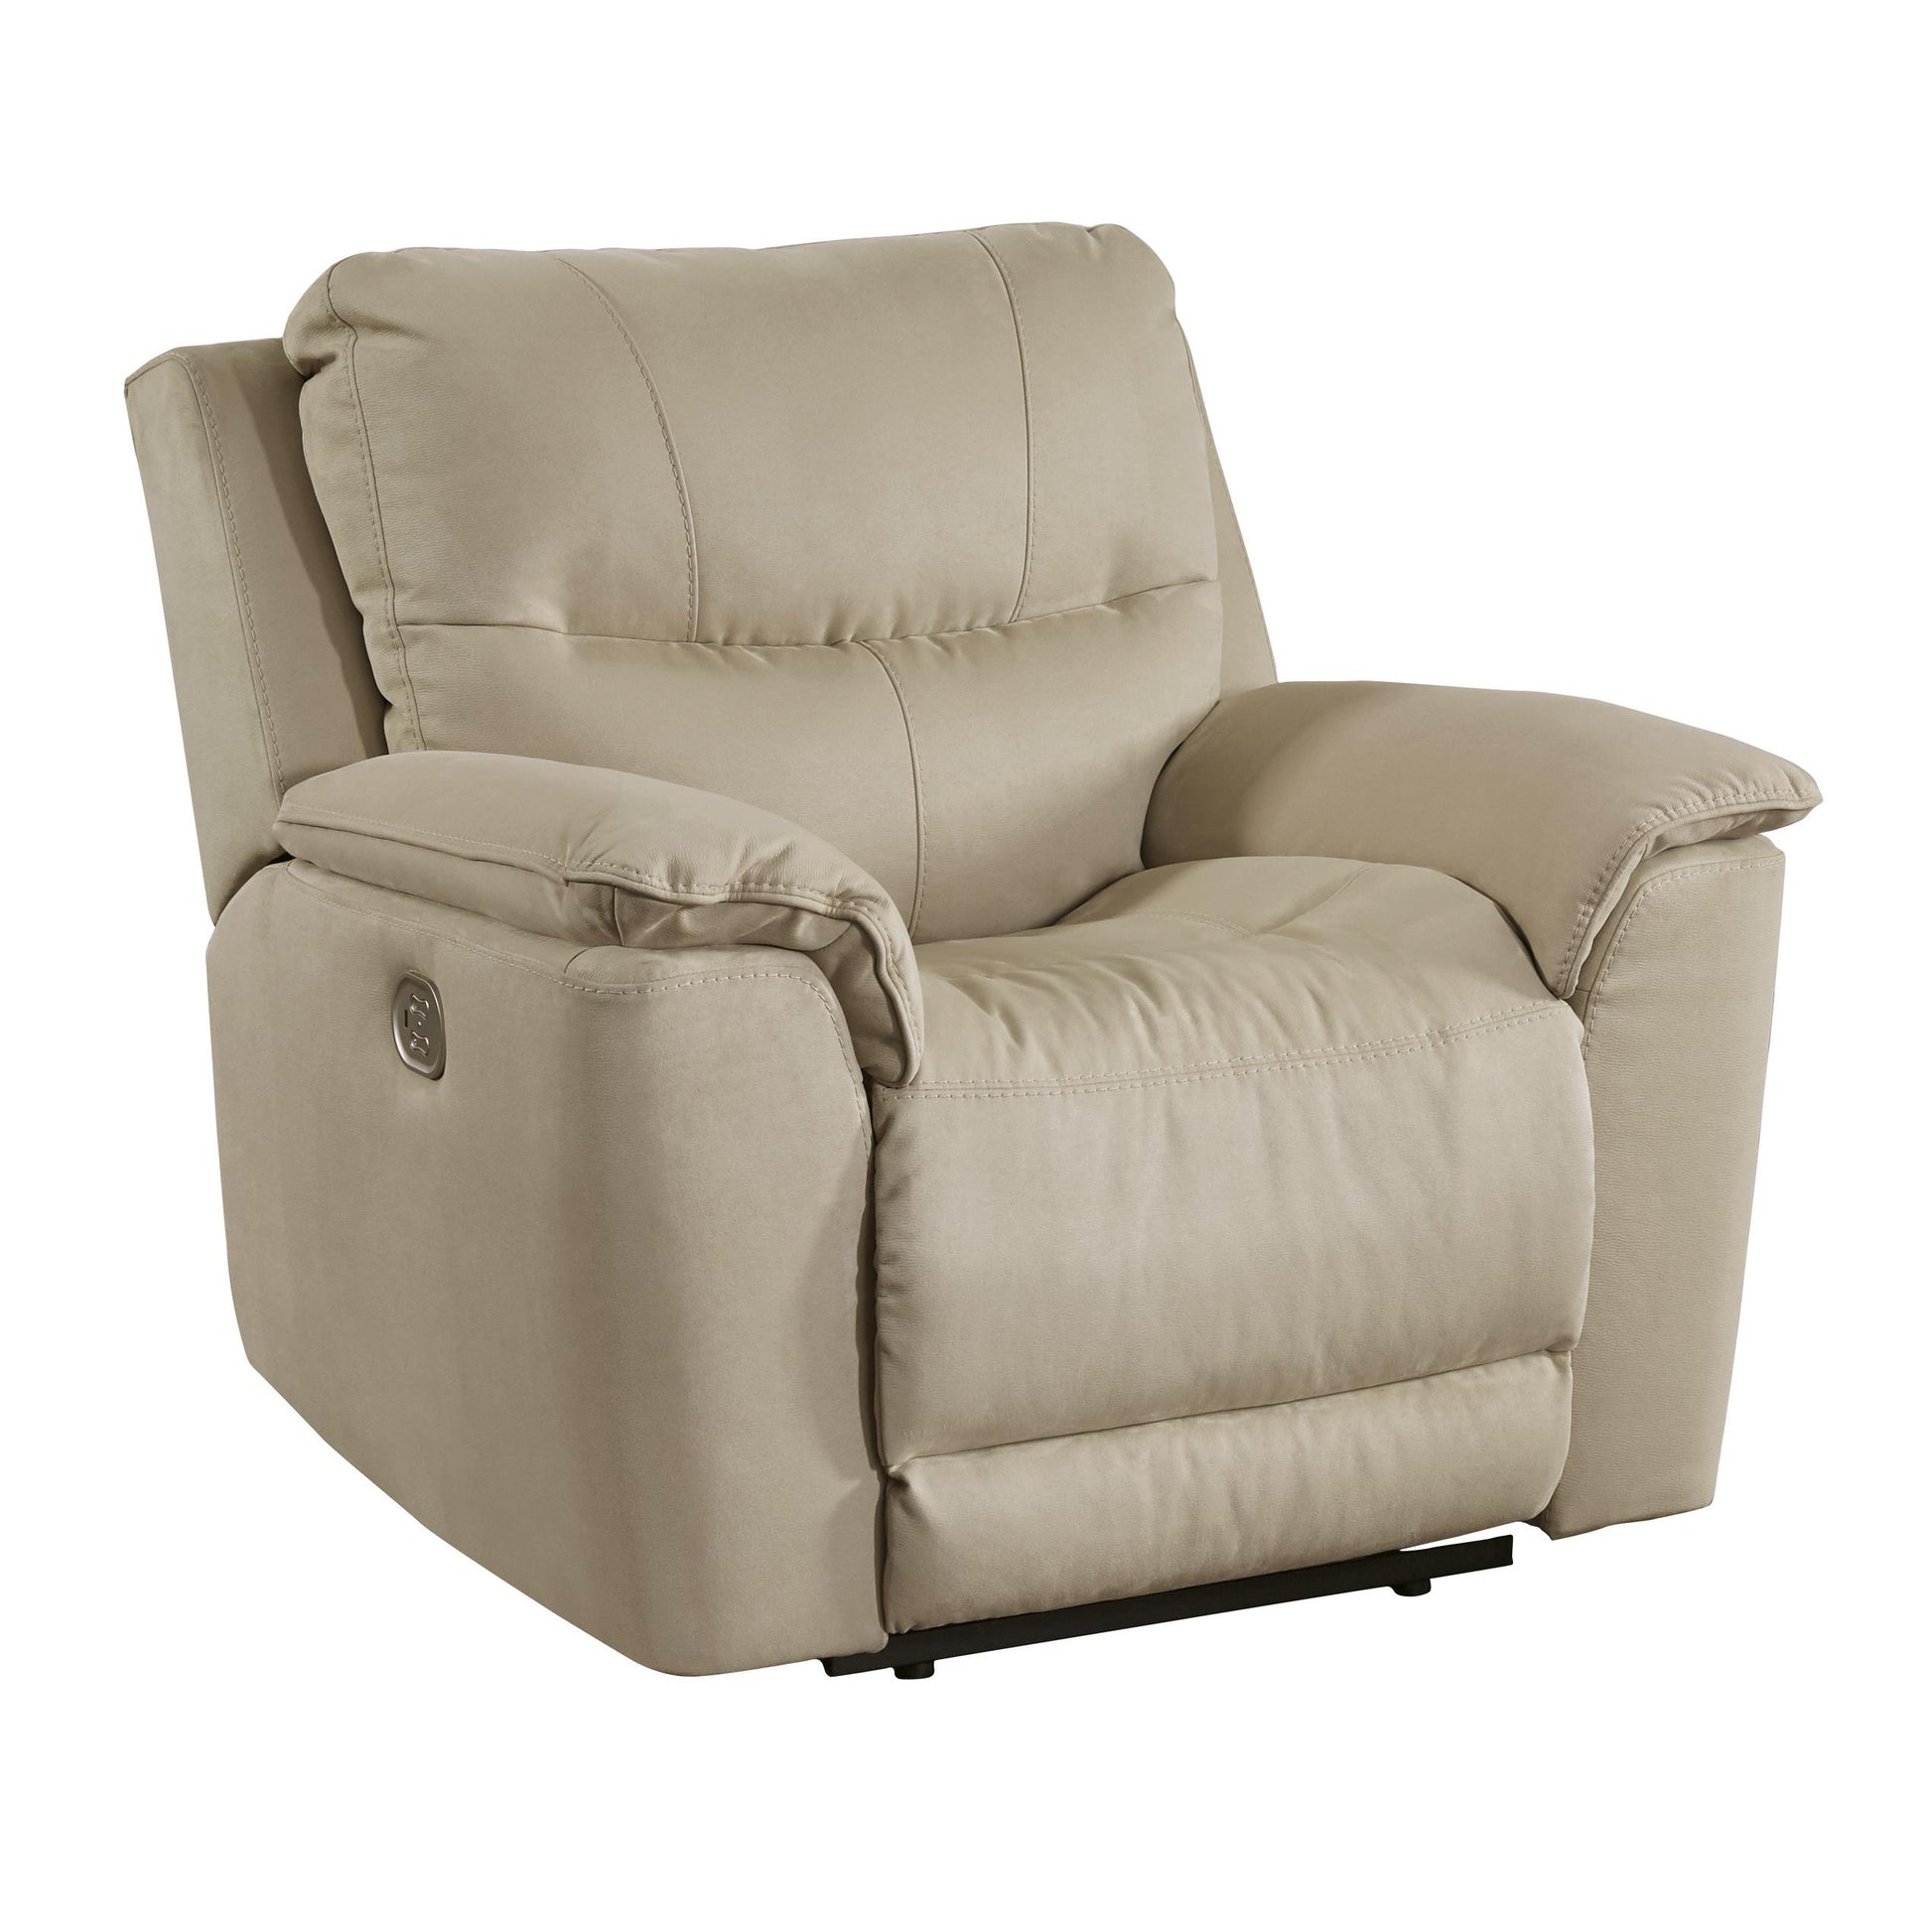 Signature Design by Ashley Next-Gen Gaucho Power Leather Look Recliner 6080713 IMAGE 1